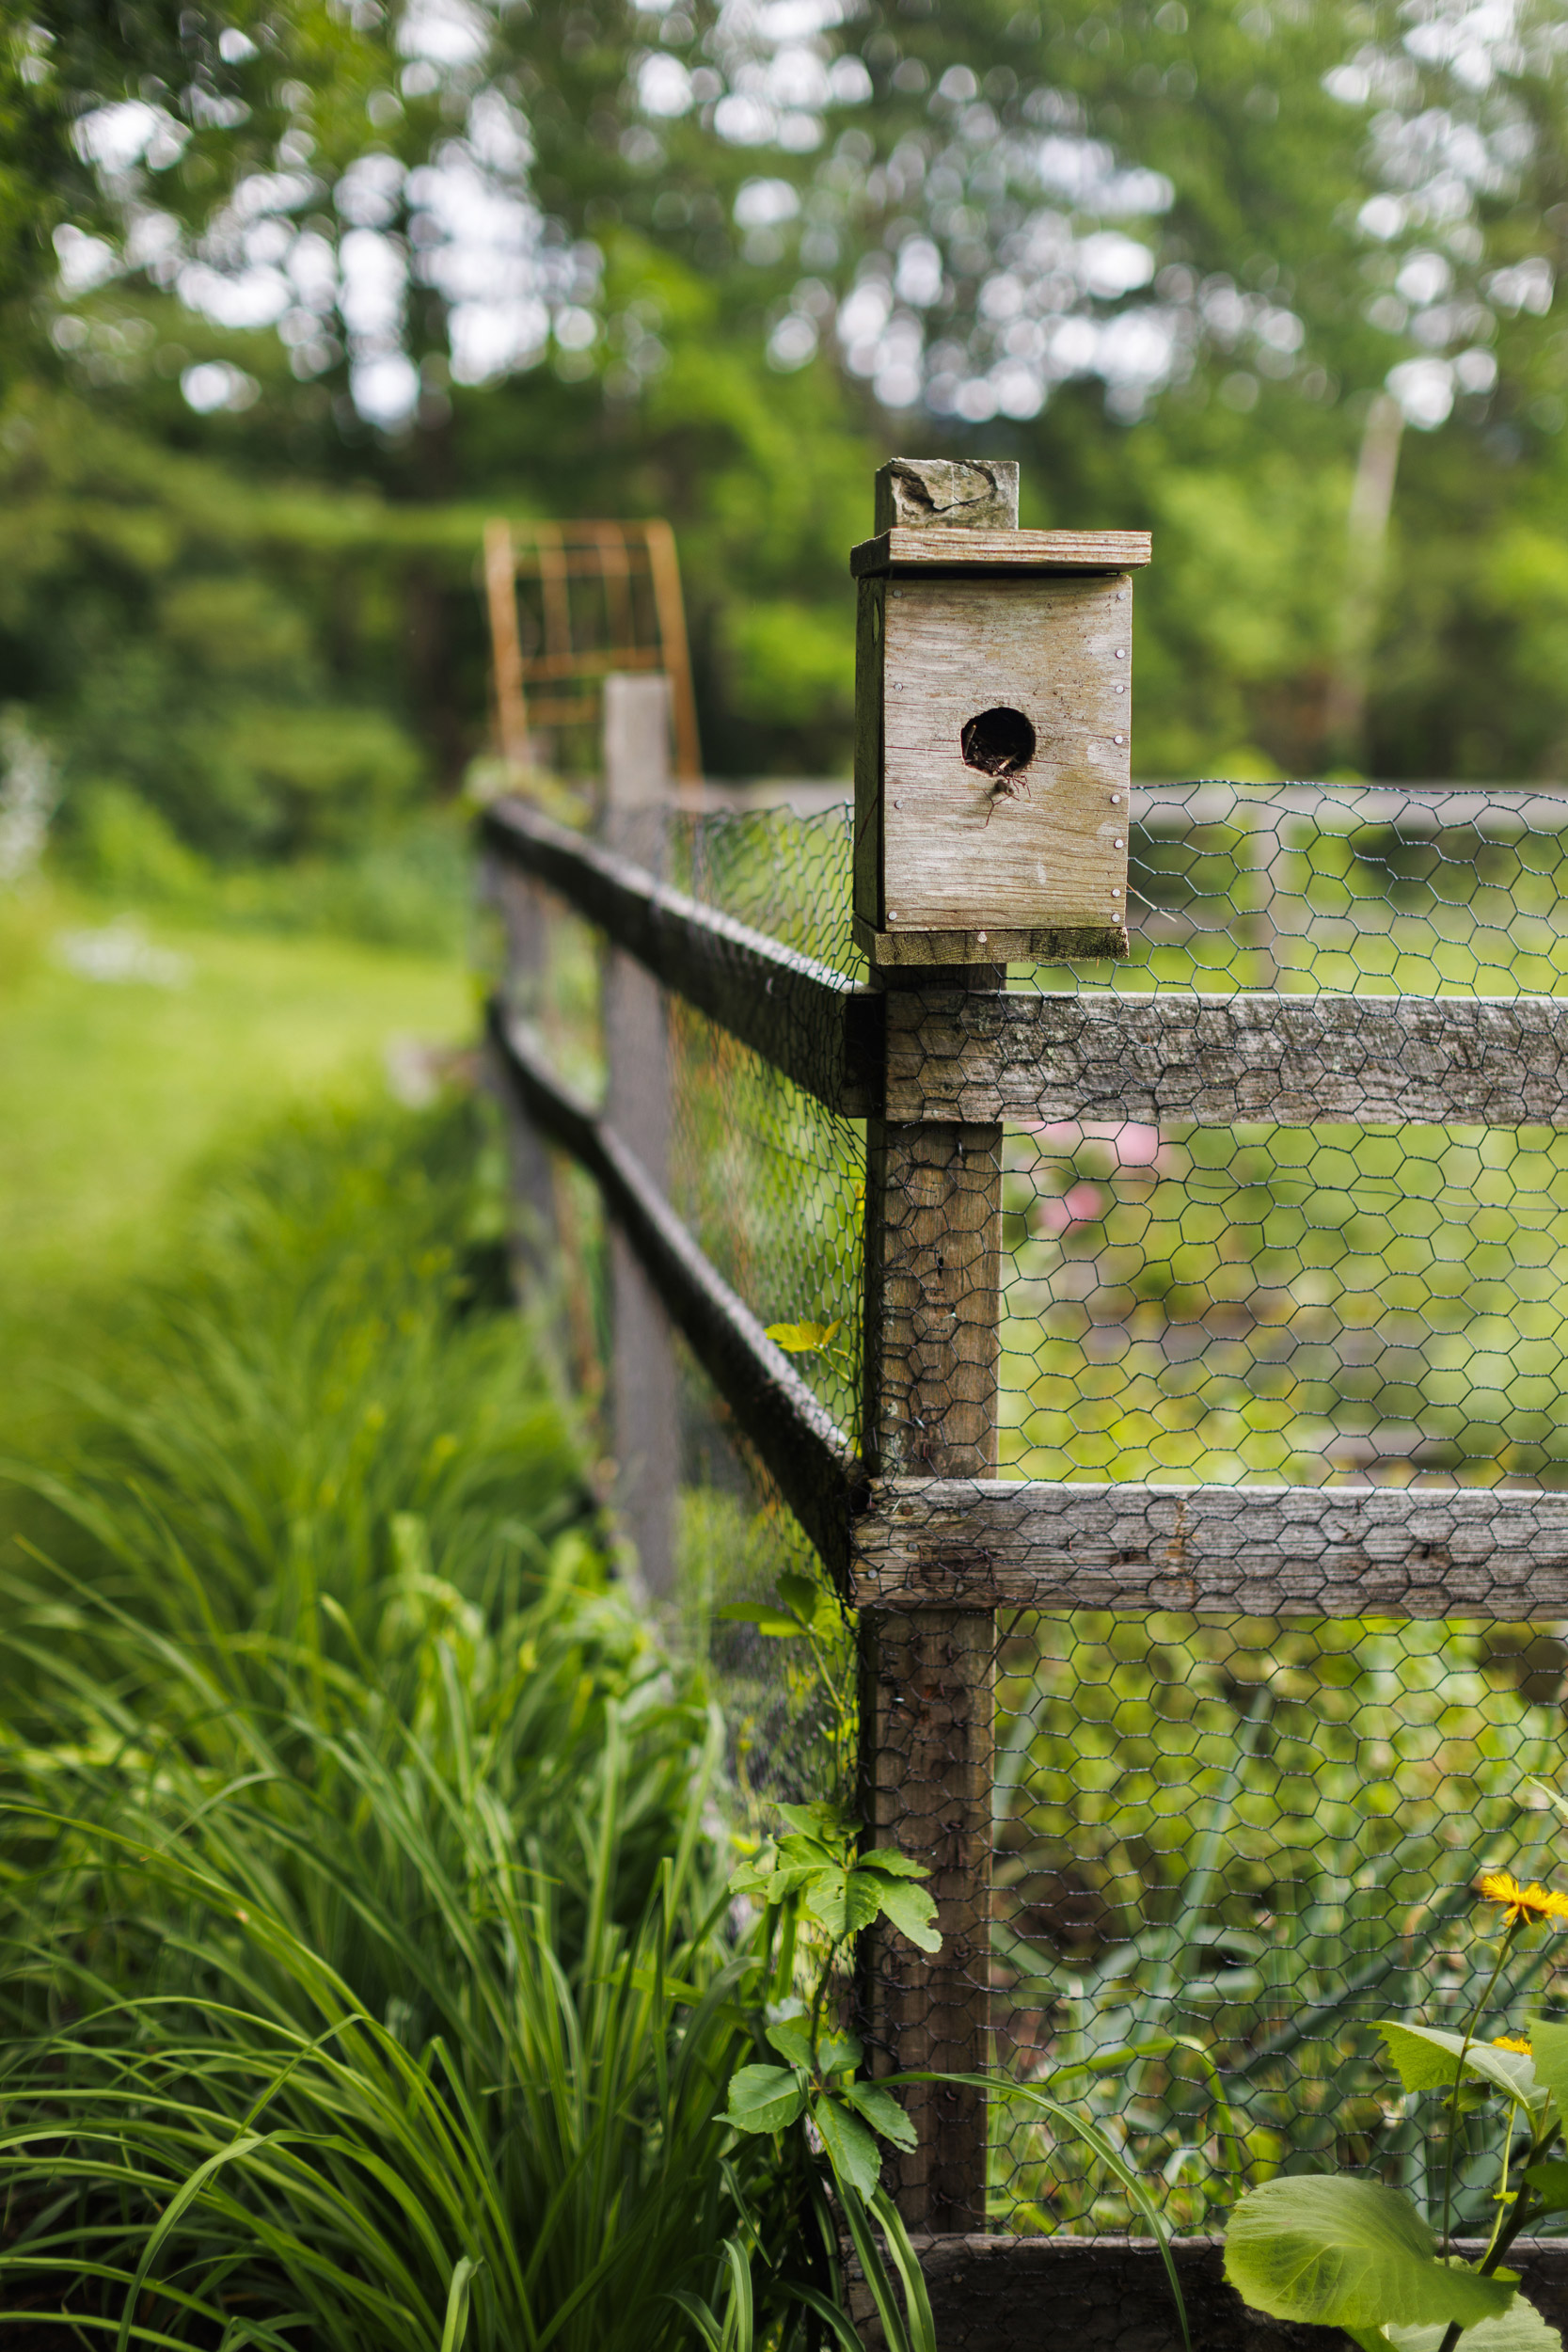 A detail of a bird house from Jamaica Kincaid's garden is pictured.